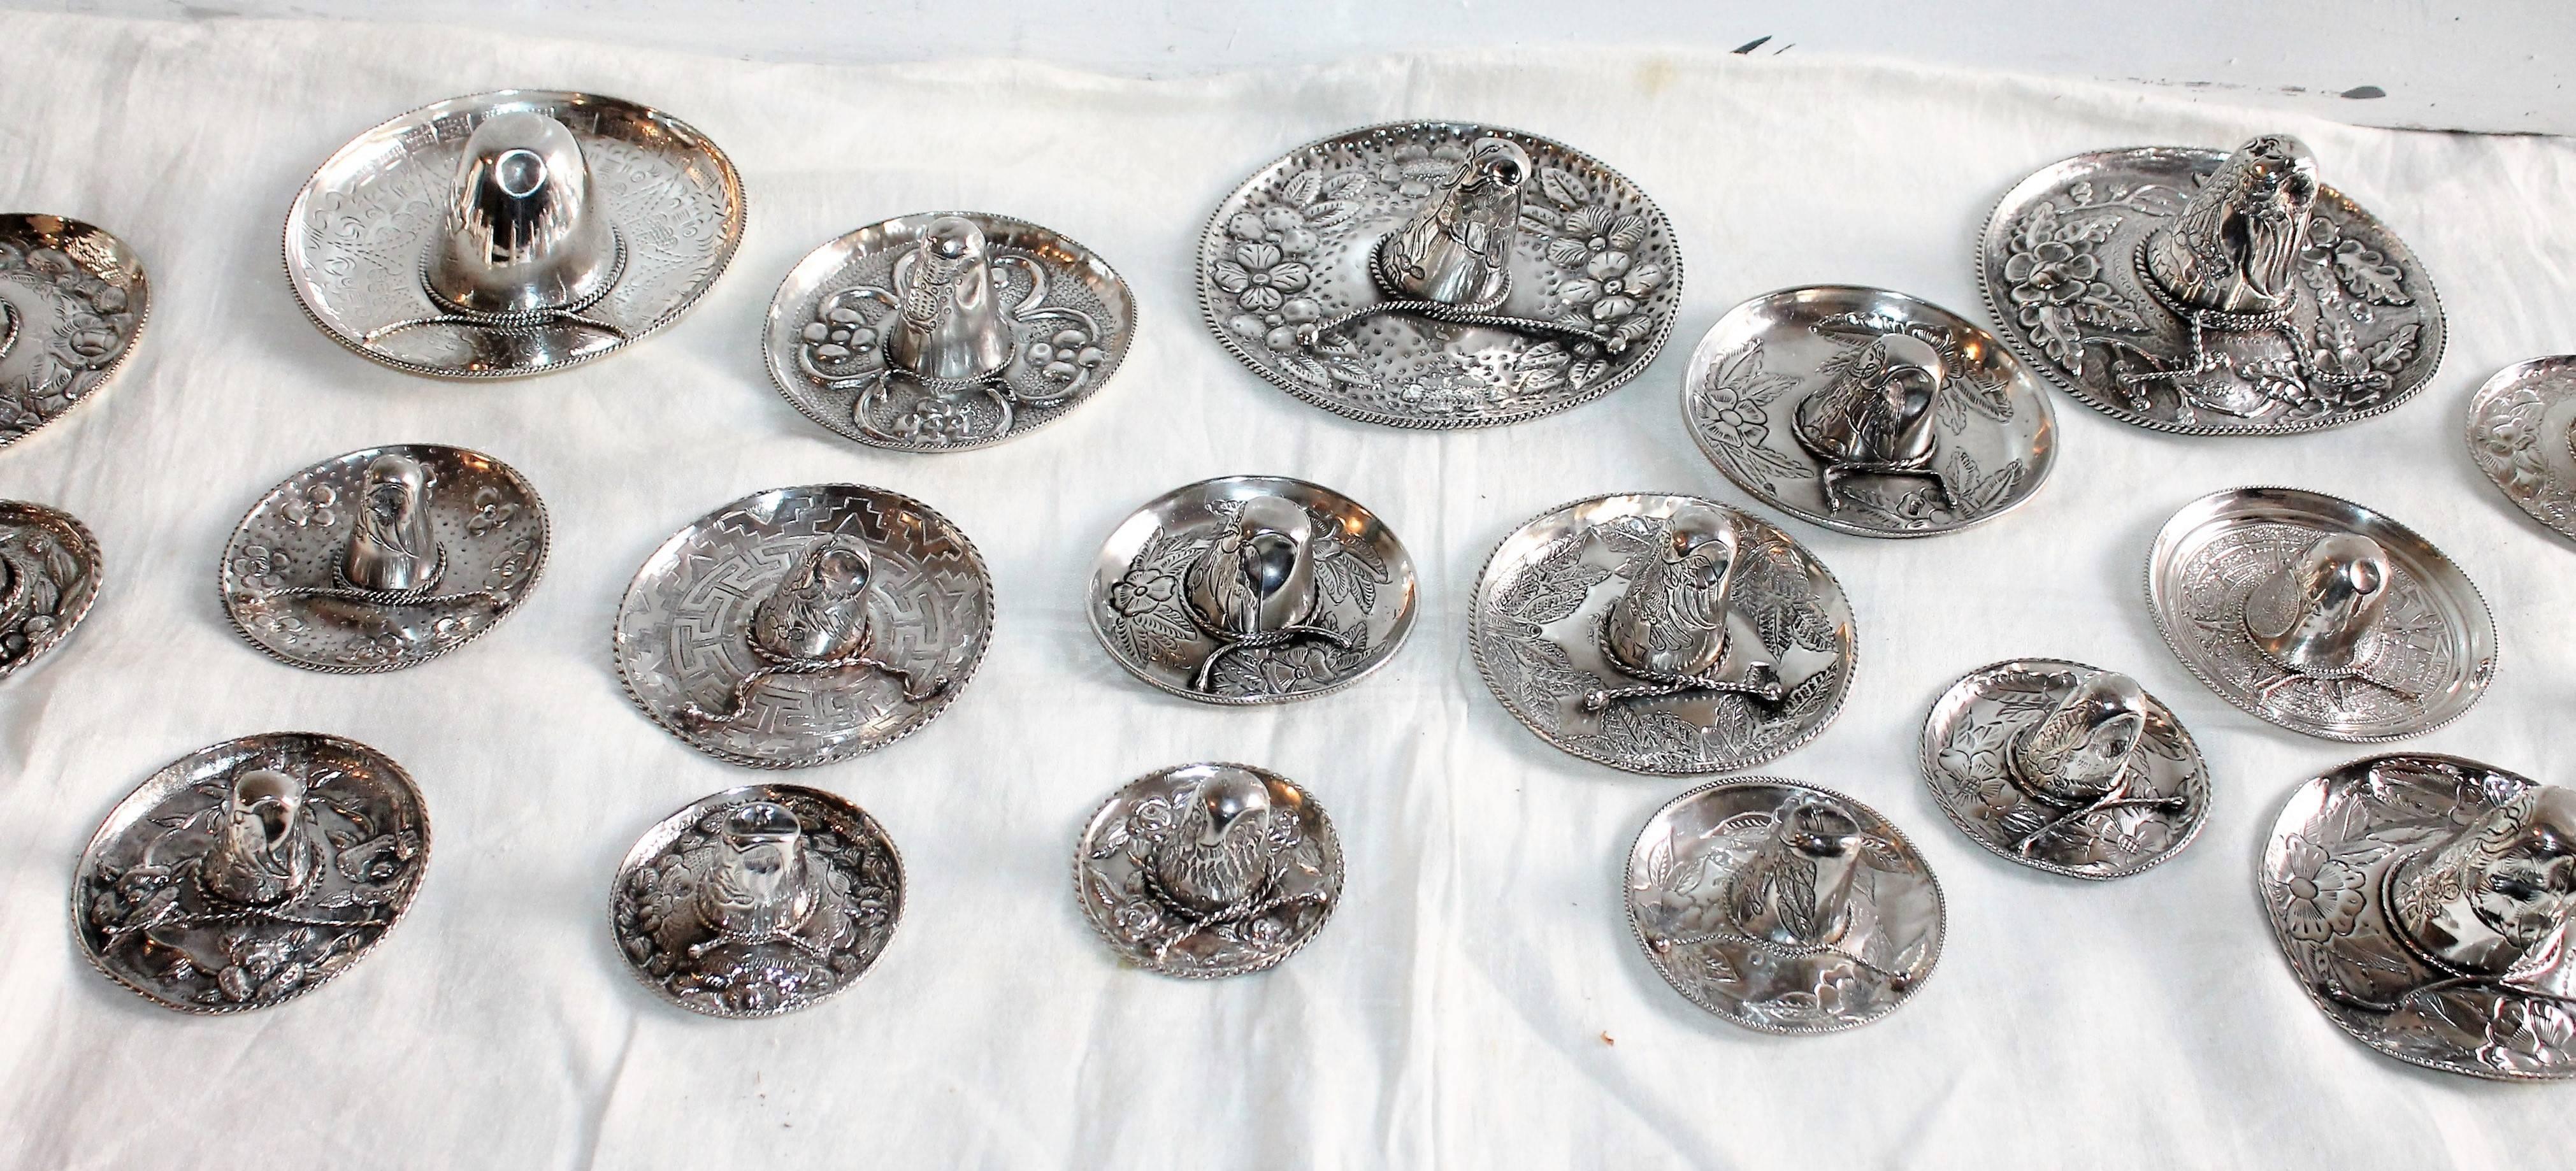 Hand-Crafted Set of 27 Decorative Mexican Sterling Silver Sombreros